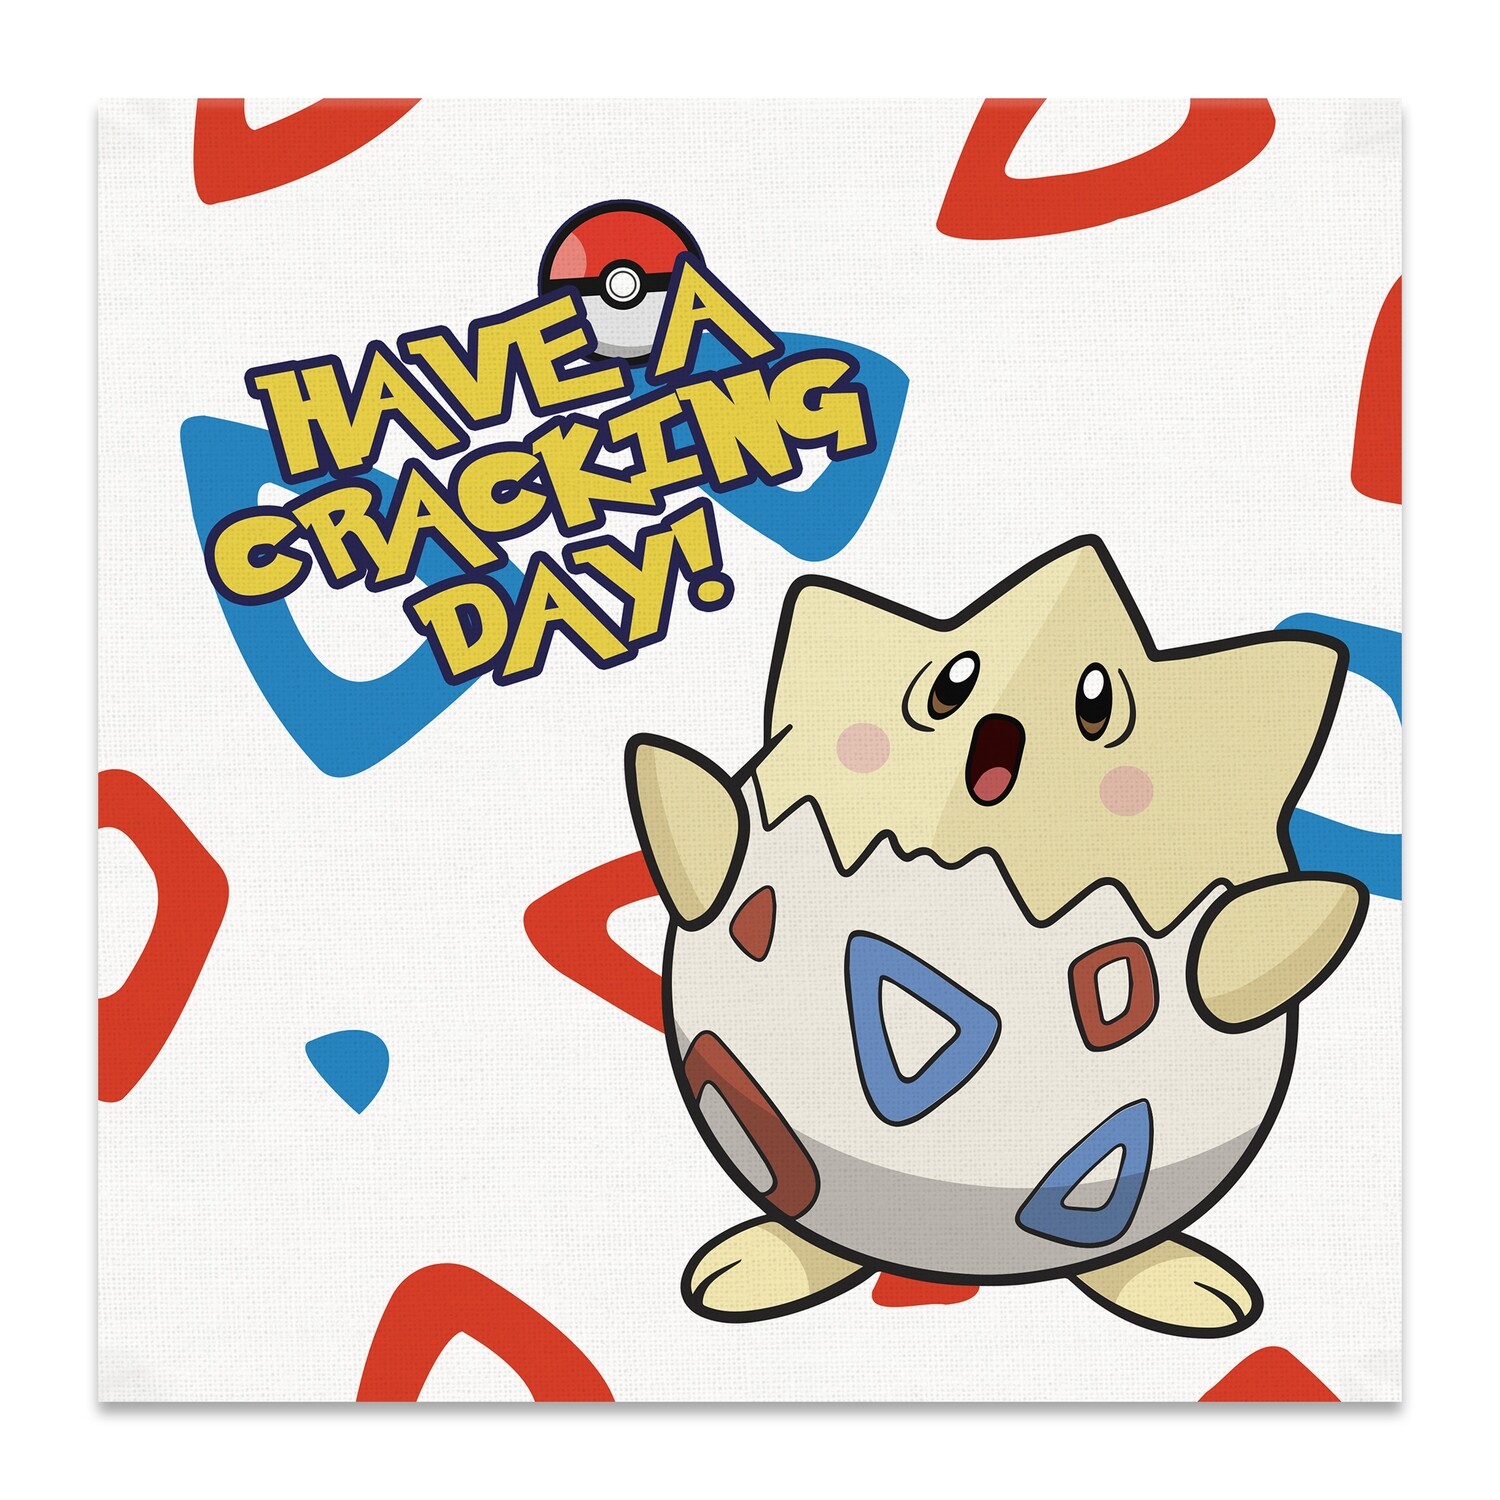 Canvas Print (Togepi Have A Cracking Day)